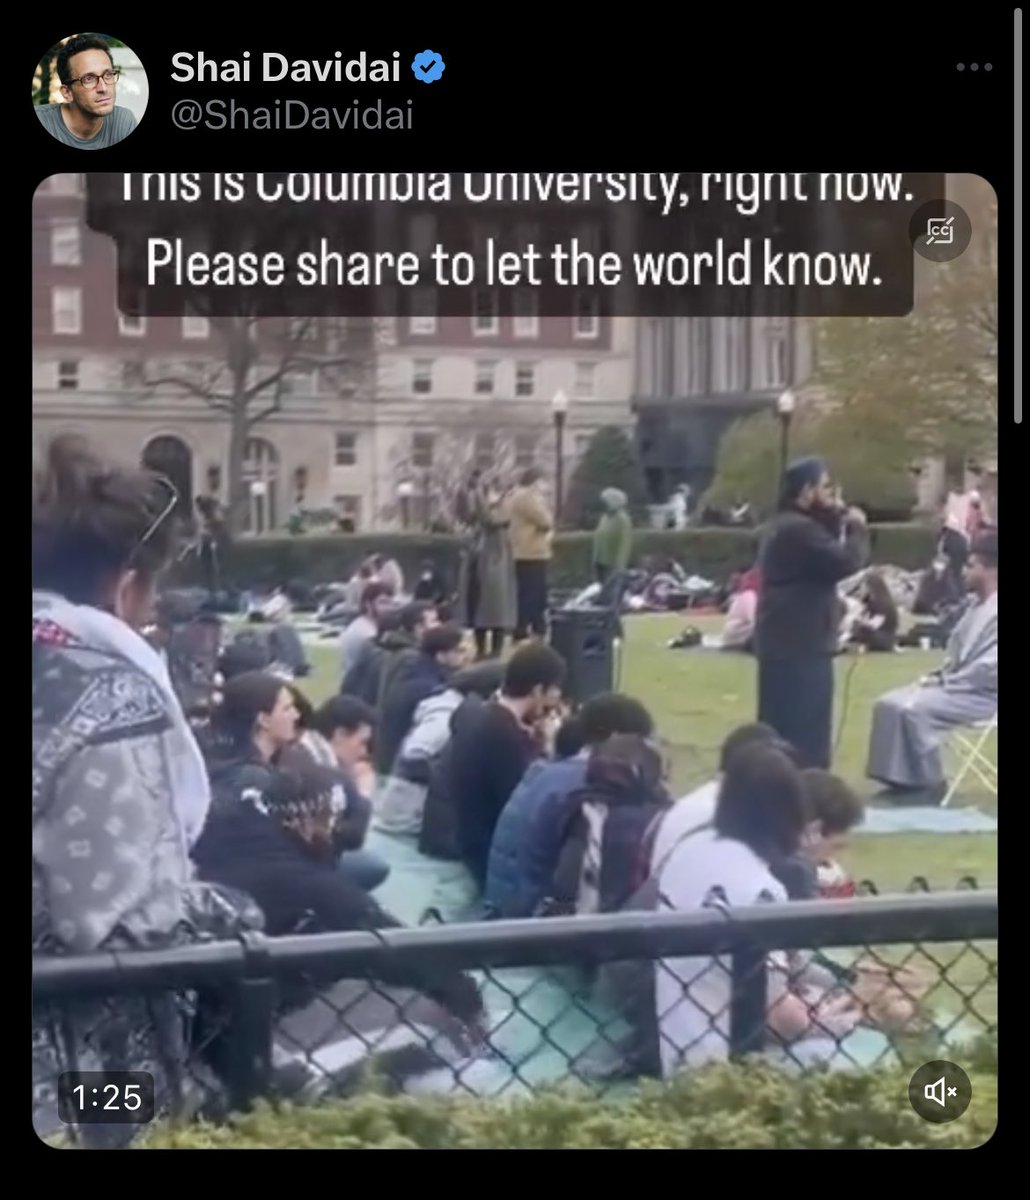 this racist freak is mad that muslims dare to pray in public. @Columbia arrested 100+ students and @BarnardCollege suspended me before doing anything about this professor despite me reporting him since october for harassing us individually. sick institution.